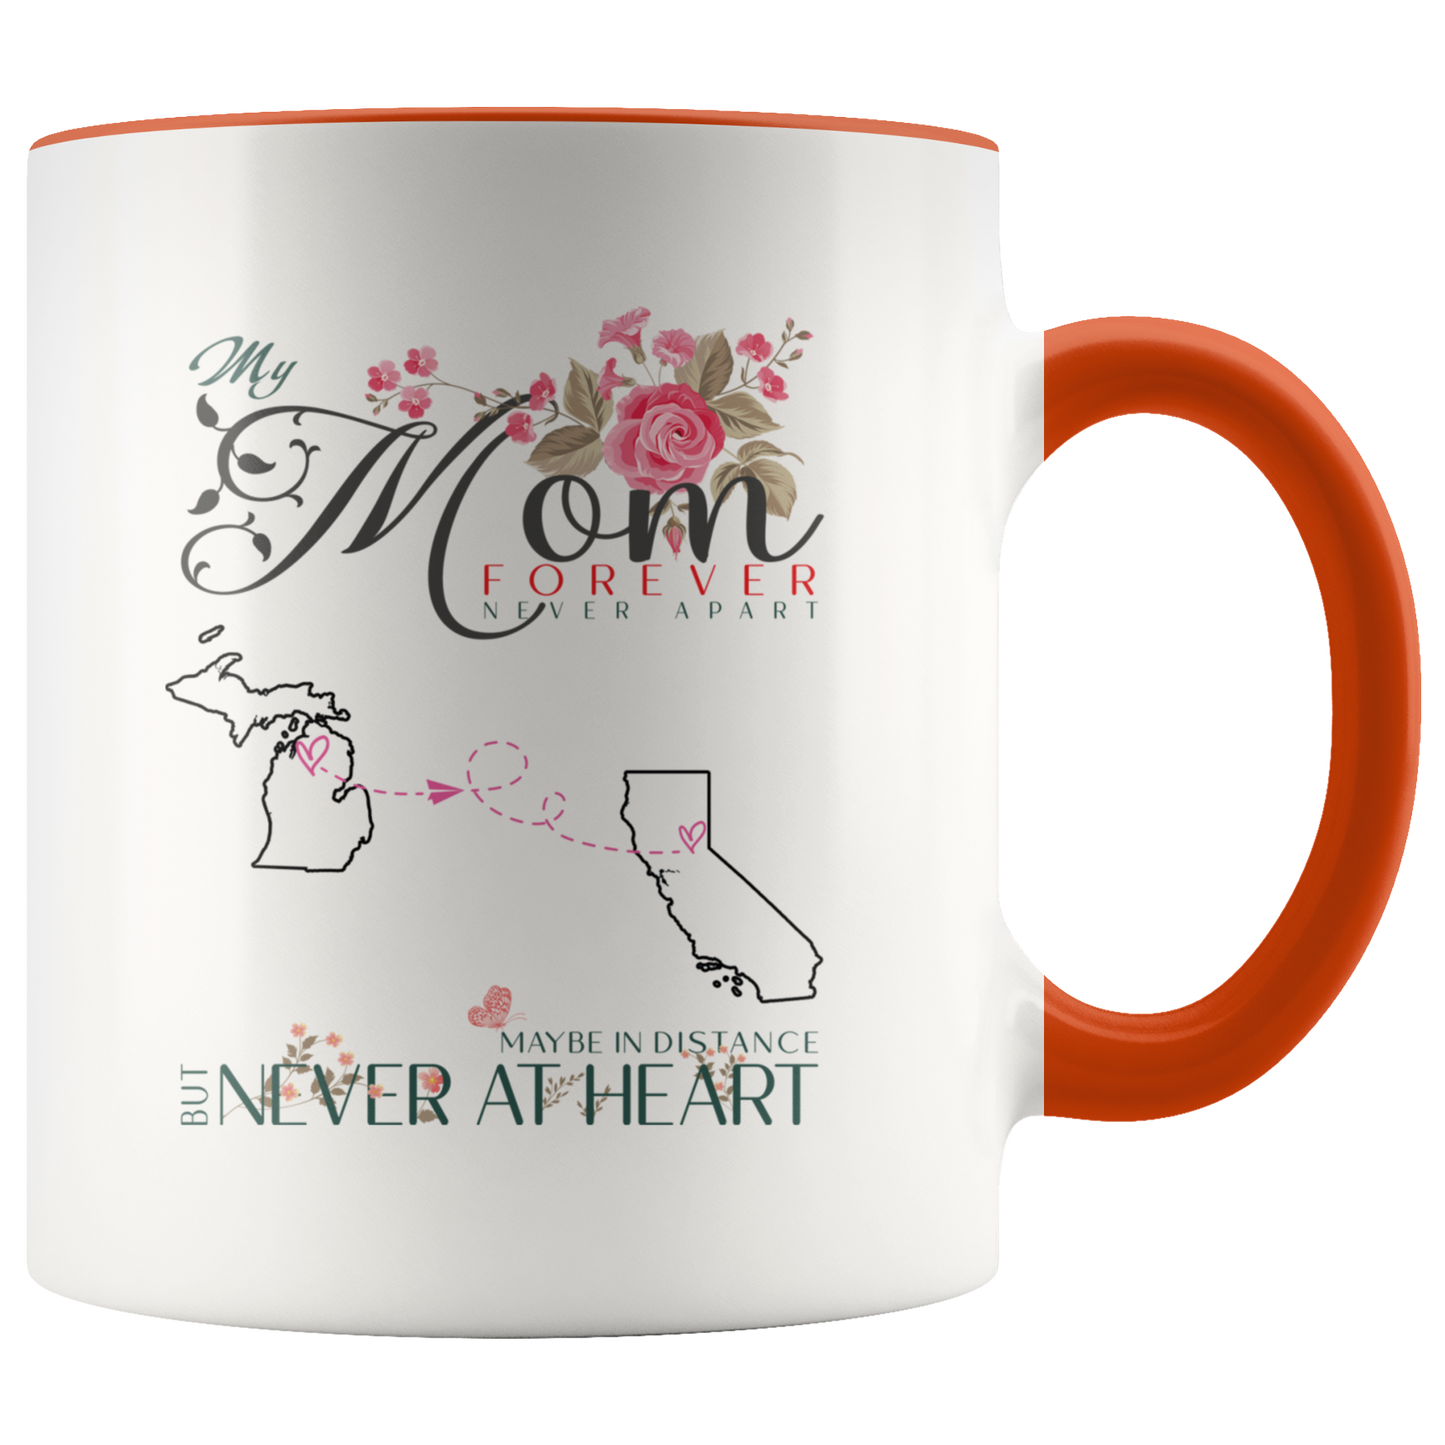 M-20321571-sp-26807 - [ Michigan | California ] (CC_Accent_Mug_) Personalized Mothers Day Coffee Mug - My Mom Forever Never A